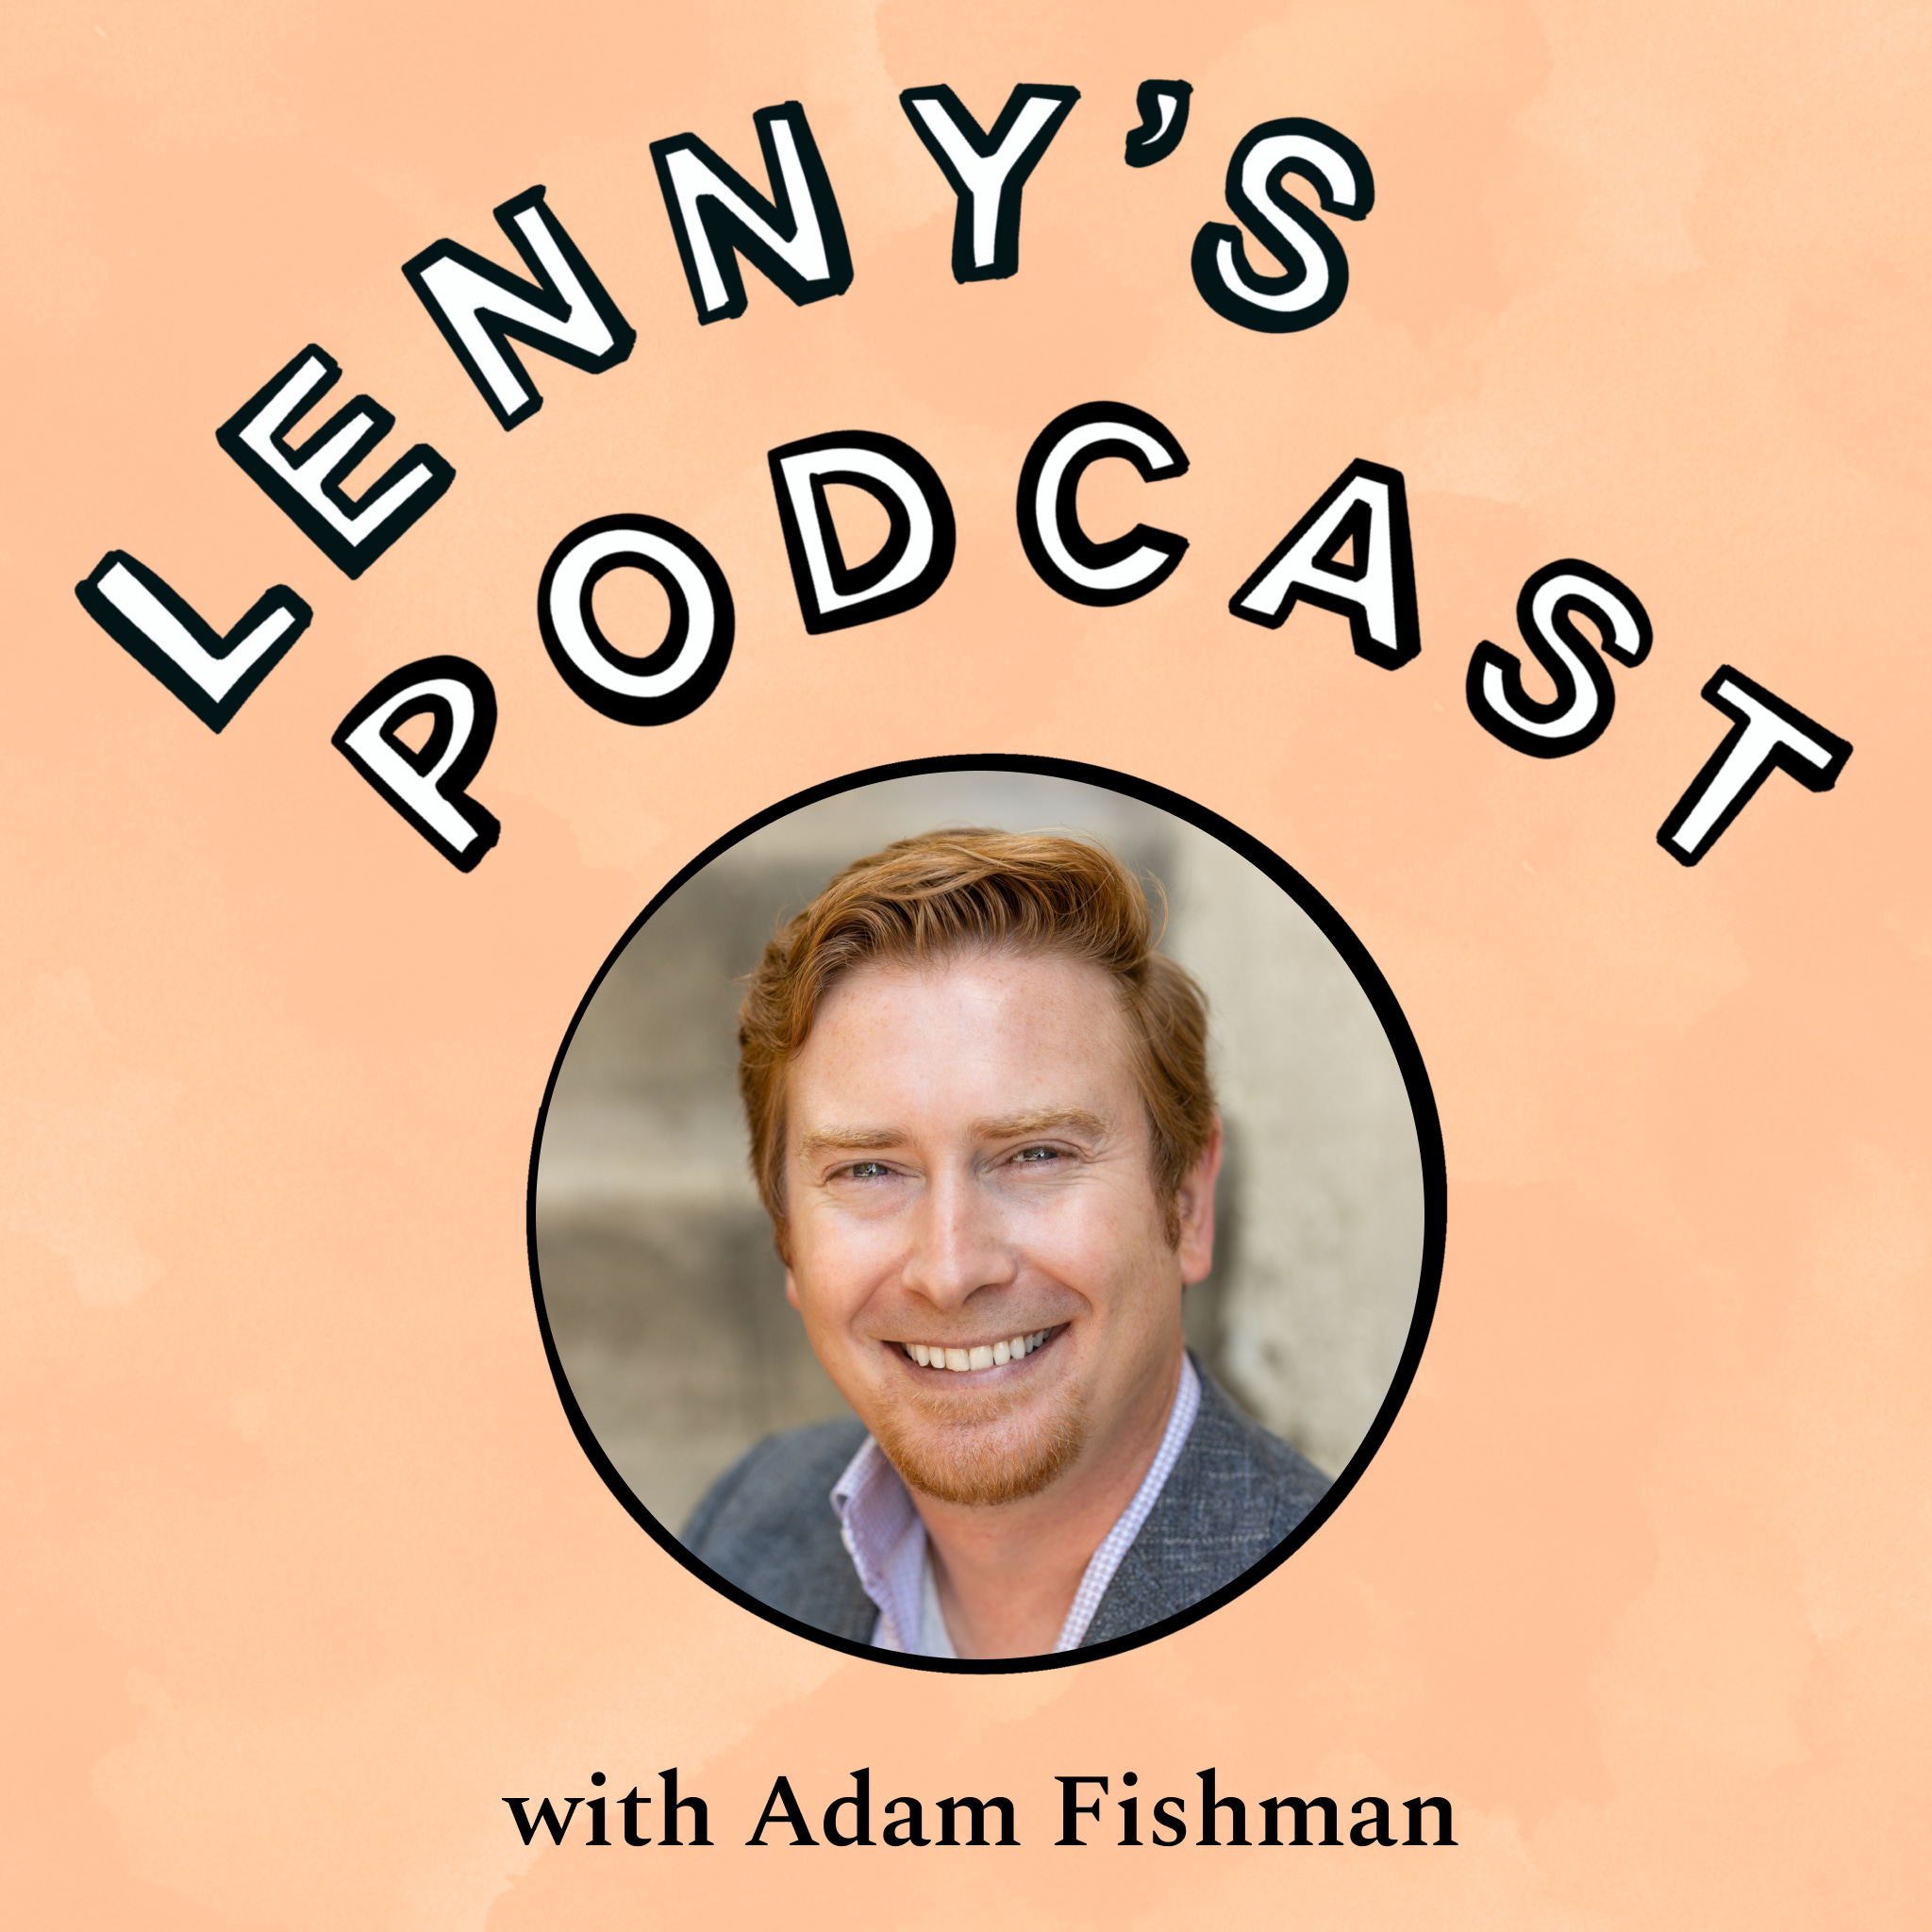 How to build a high-performing growth team | Adam Fishman (Patreon, Lyft, Imperfect Foods) Image